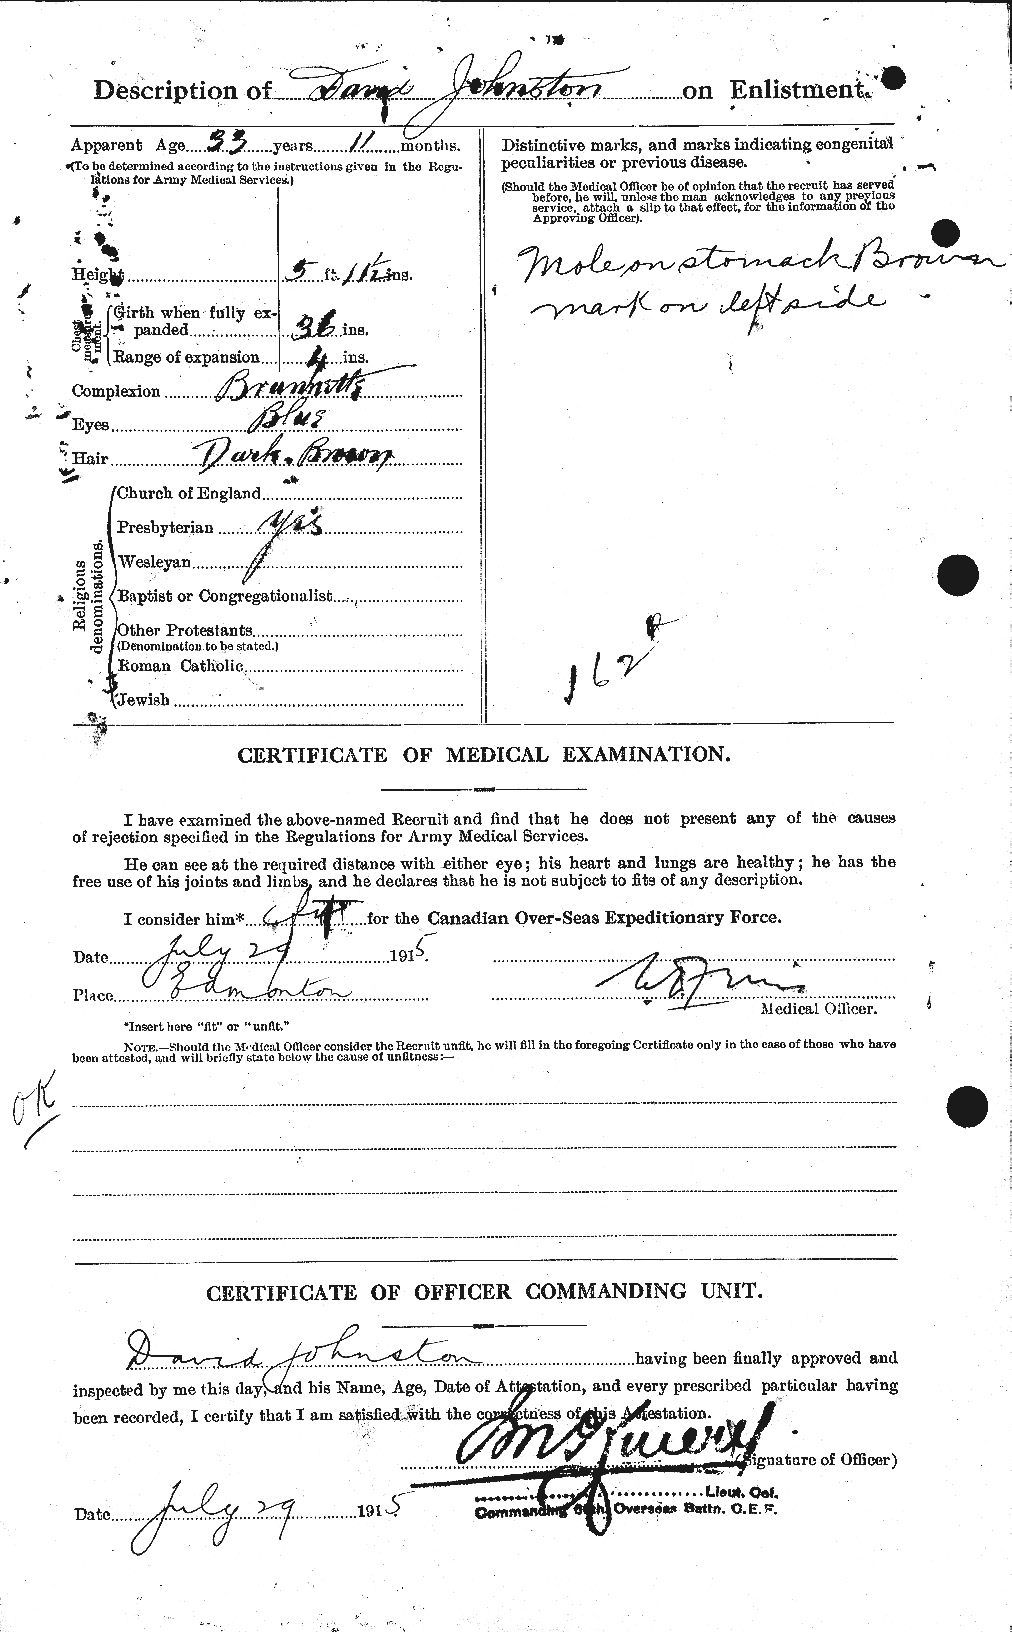 Personnel Records of the First World War - CEF 423150b